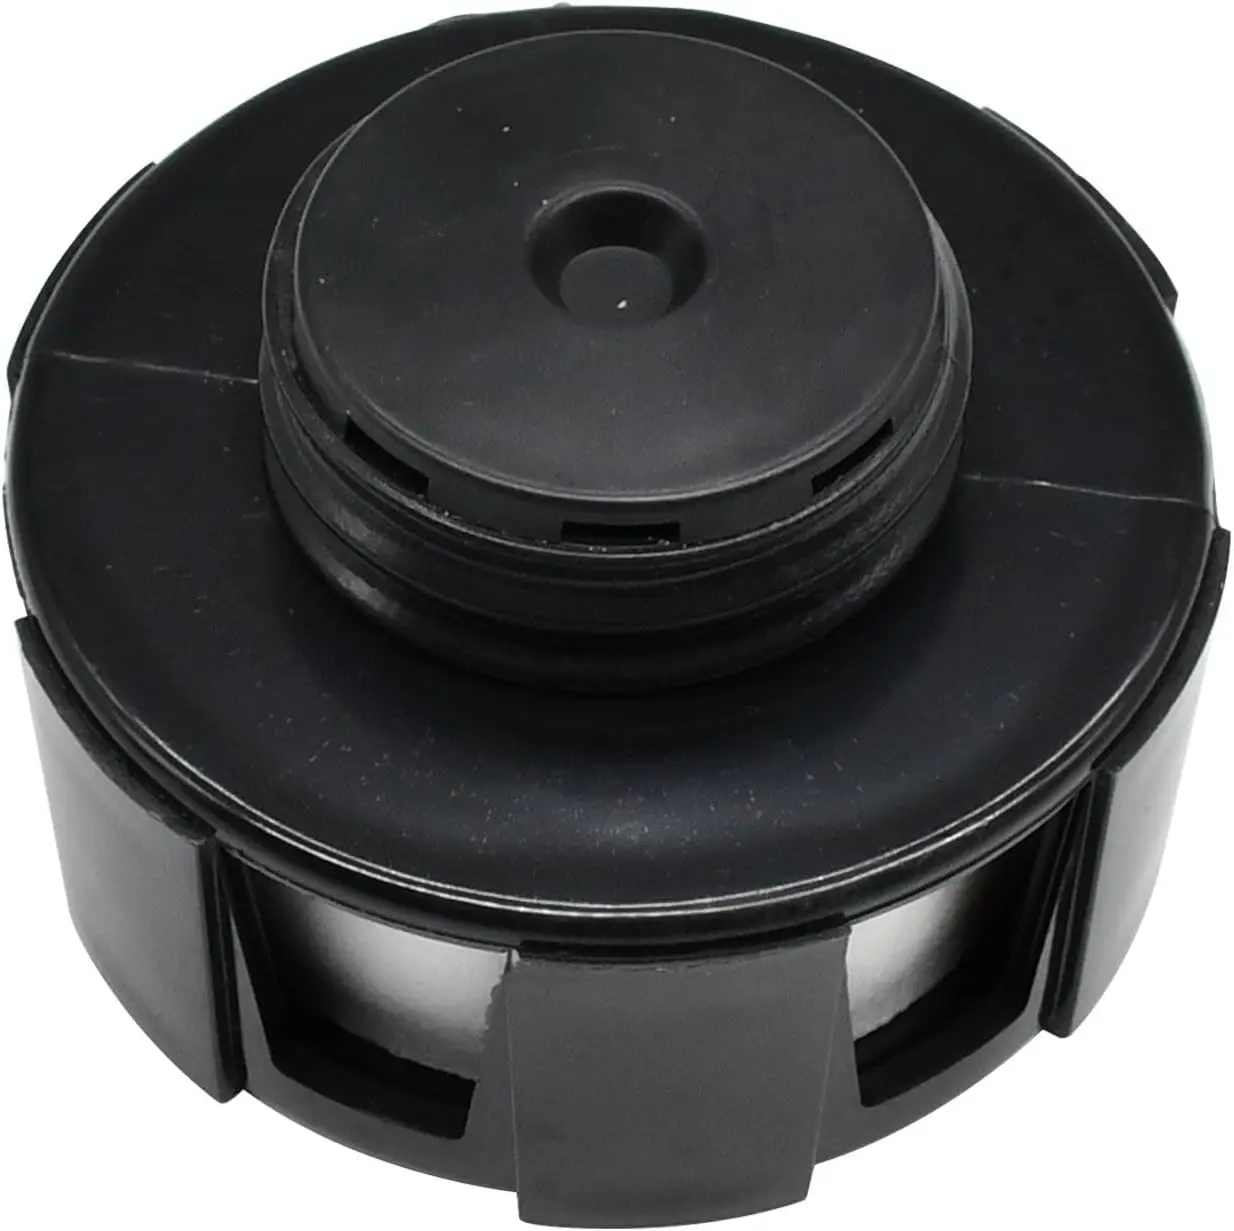 

Hydraulic Oil Vent Cap 6727475 for Bobcat Skid Steer Loader T110 T140 T650 T750 S550 S570 S590 S630 S650 S750 S770 S850